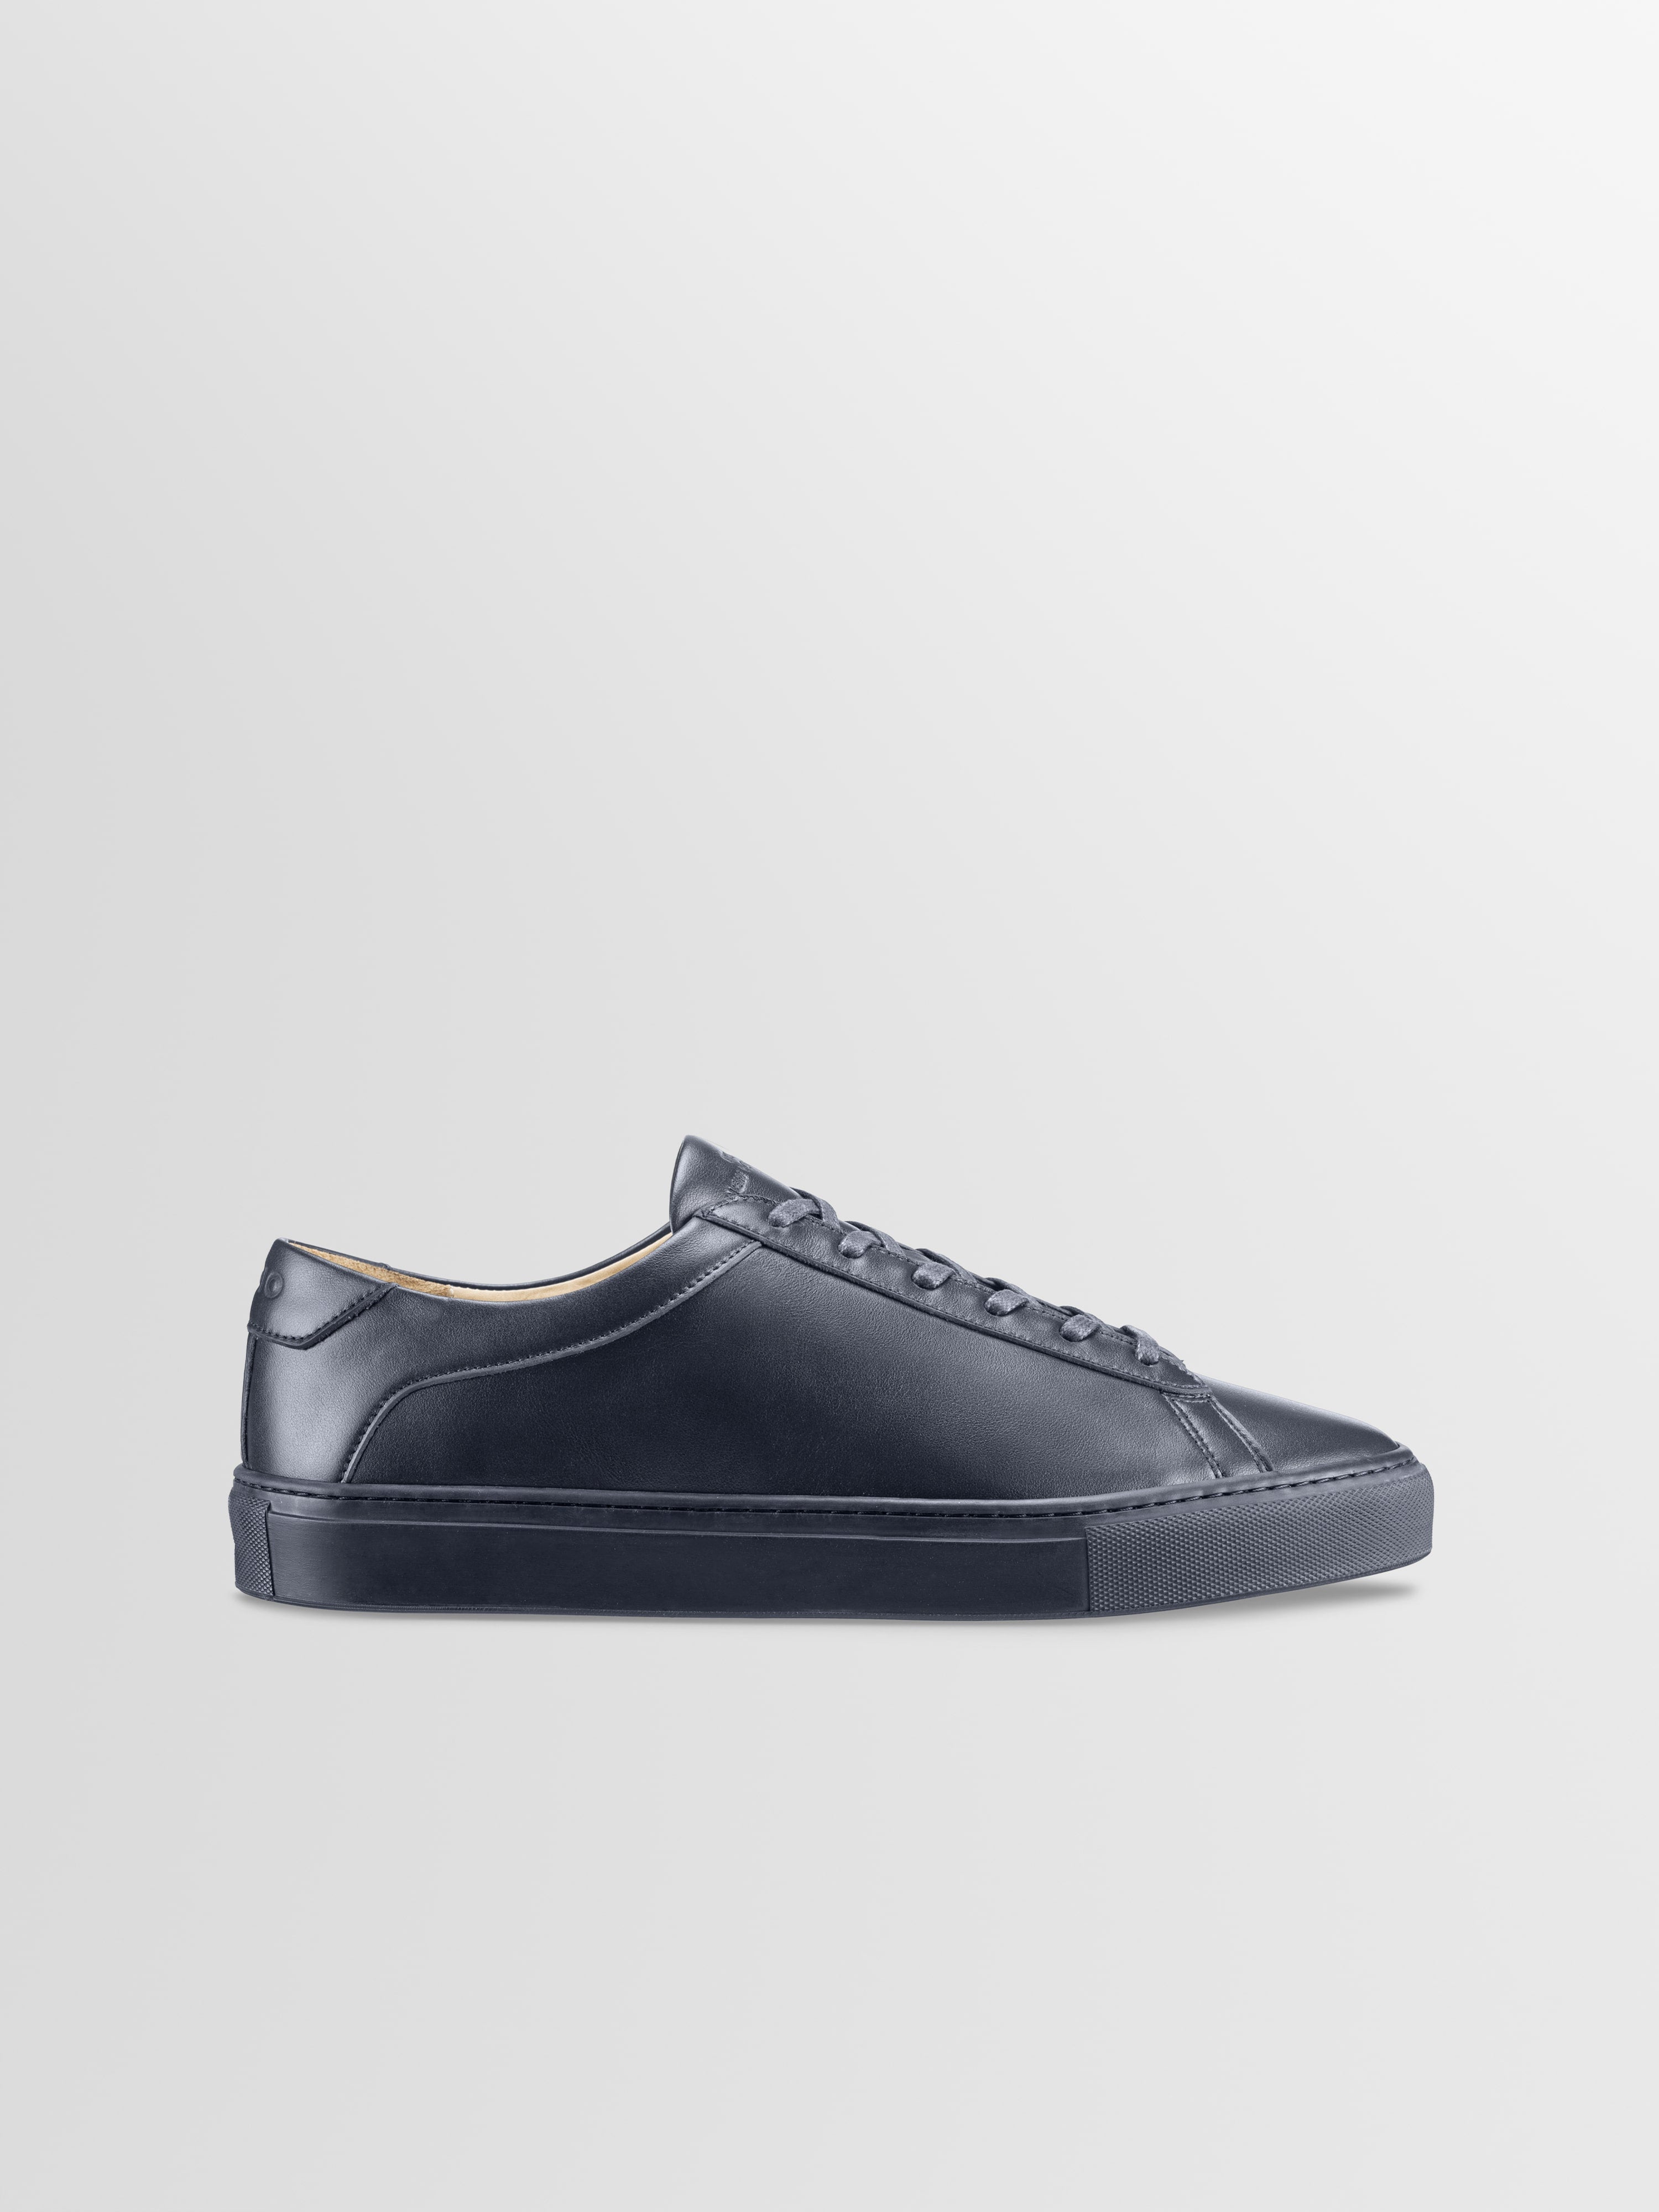 Men's Sneakers - Leather, Suede, High Tops, Low Sneakers | SUITSUPPLY US